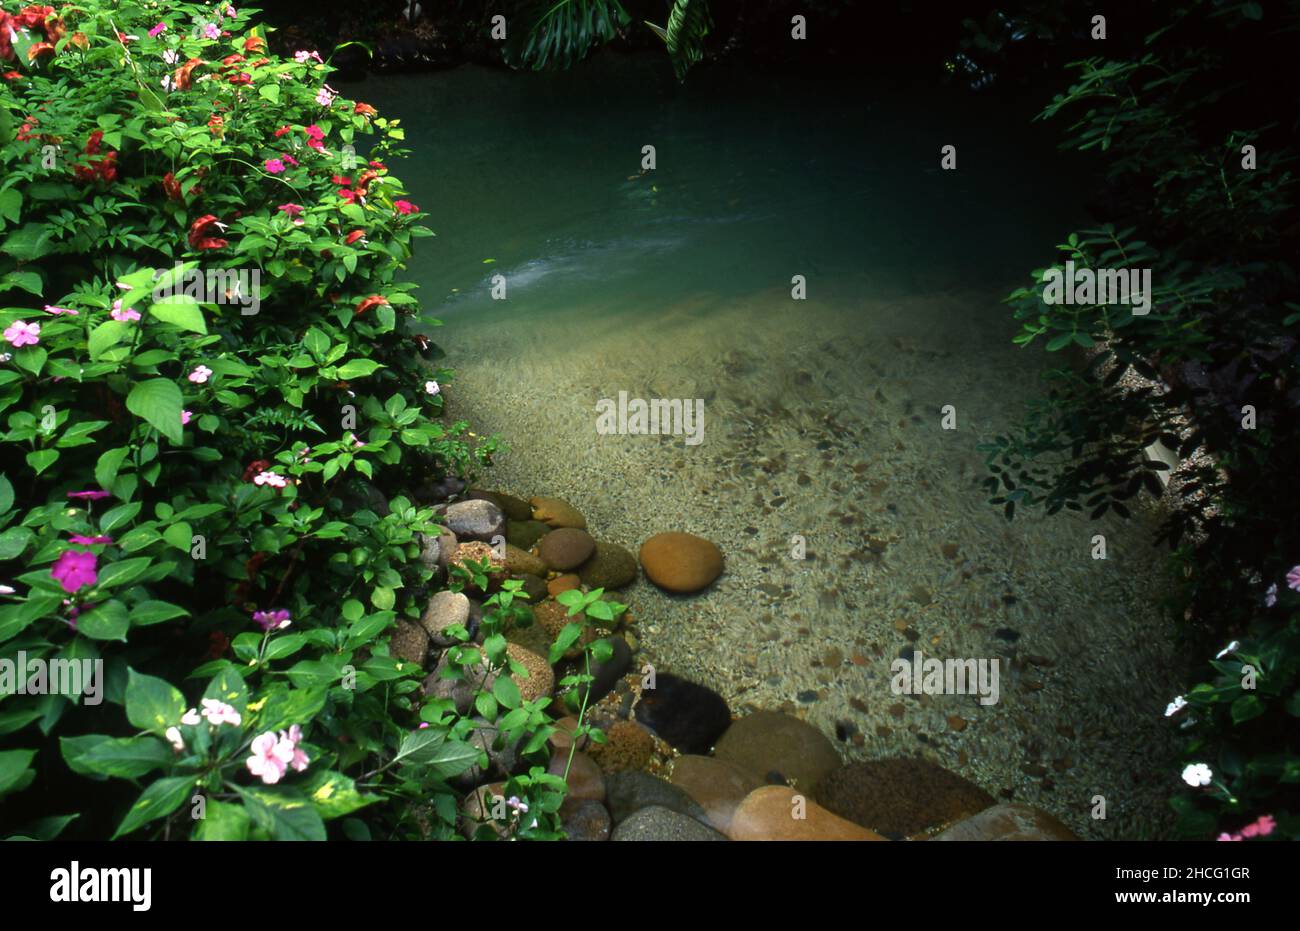 SECLUDED GARDEN POND SURROUNDED BY IMPATIENS AND ASSORTED SHRUBS, SYDNEY, NEW SOUTH WALES, AUSTRALIA. Stock Photo